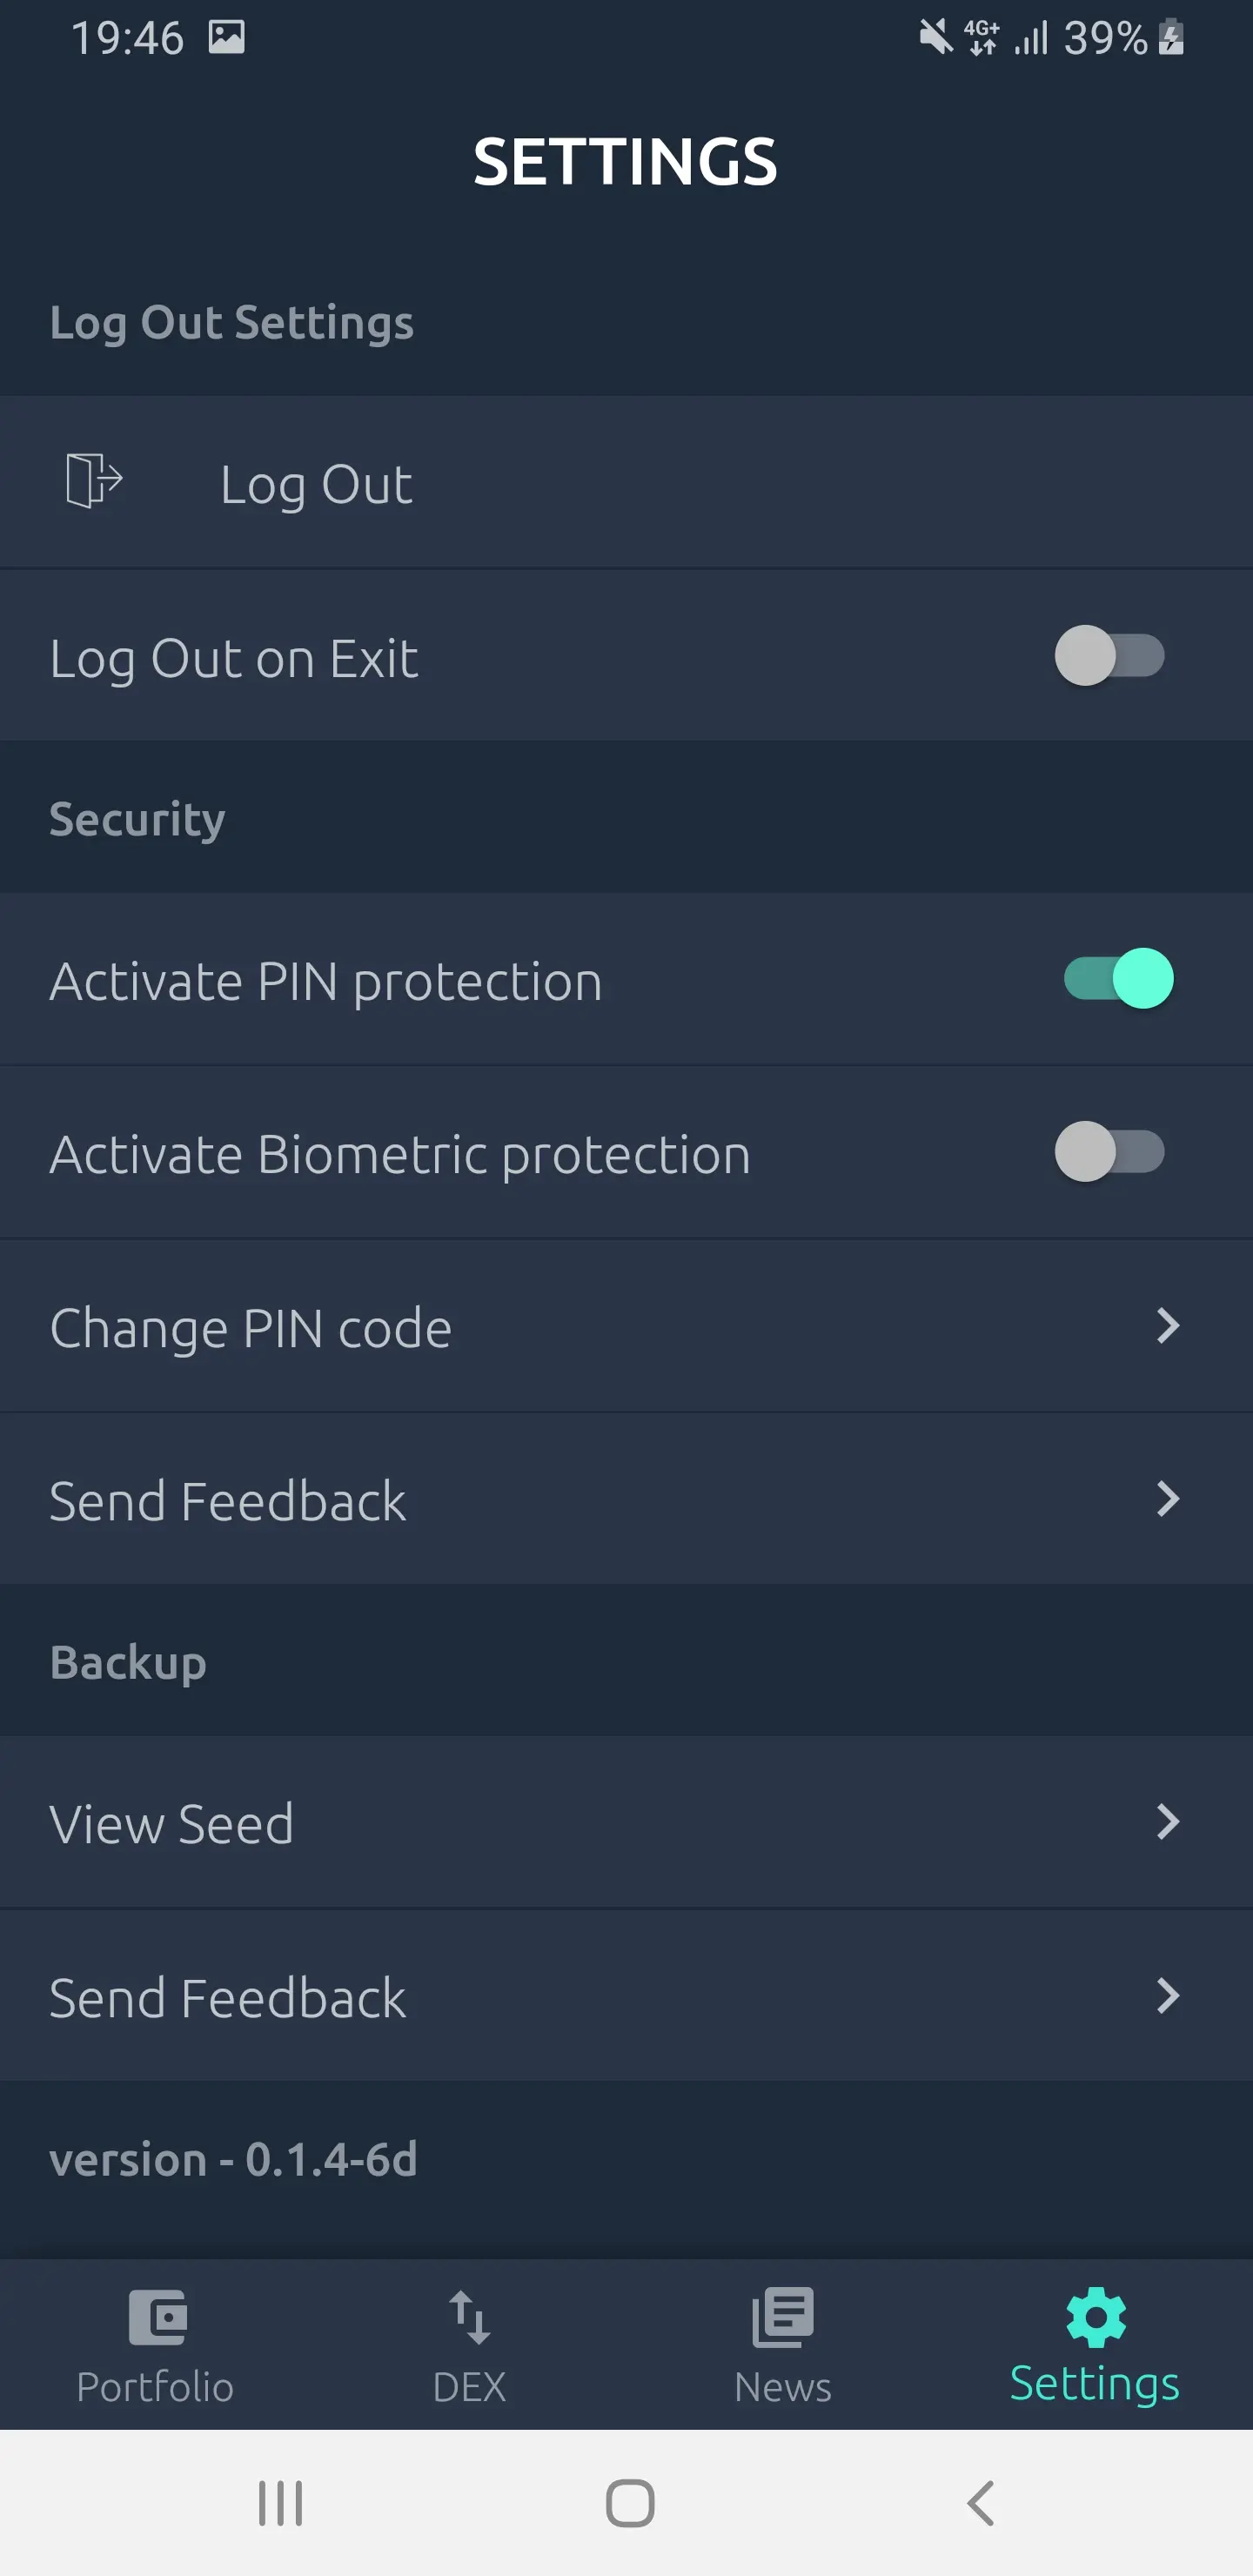 How to Recover Seed on Komodo Mobile Wallet